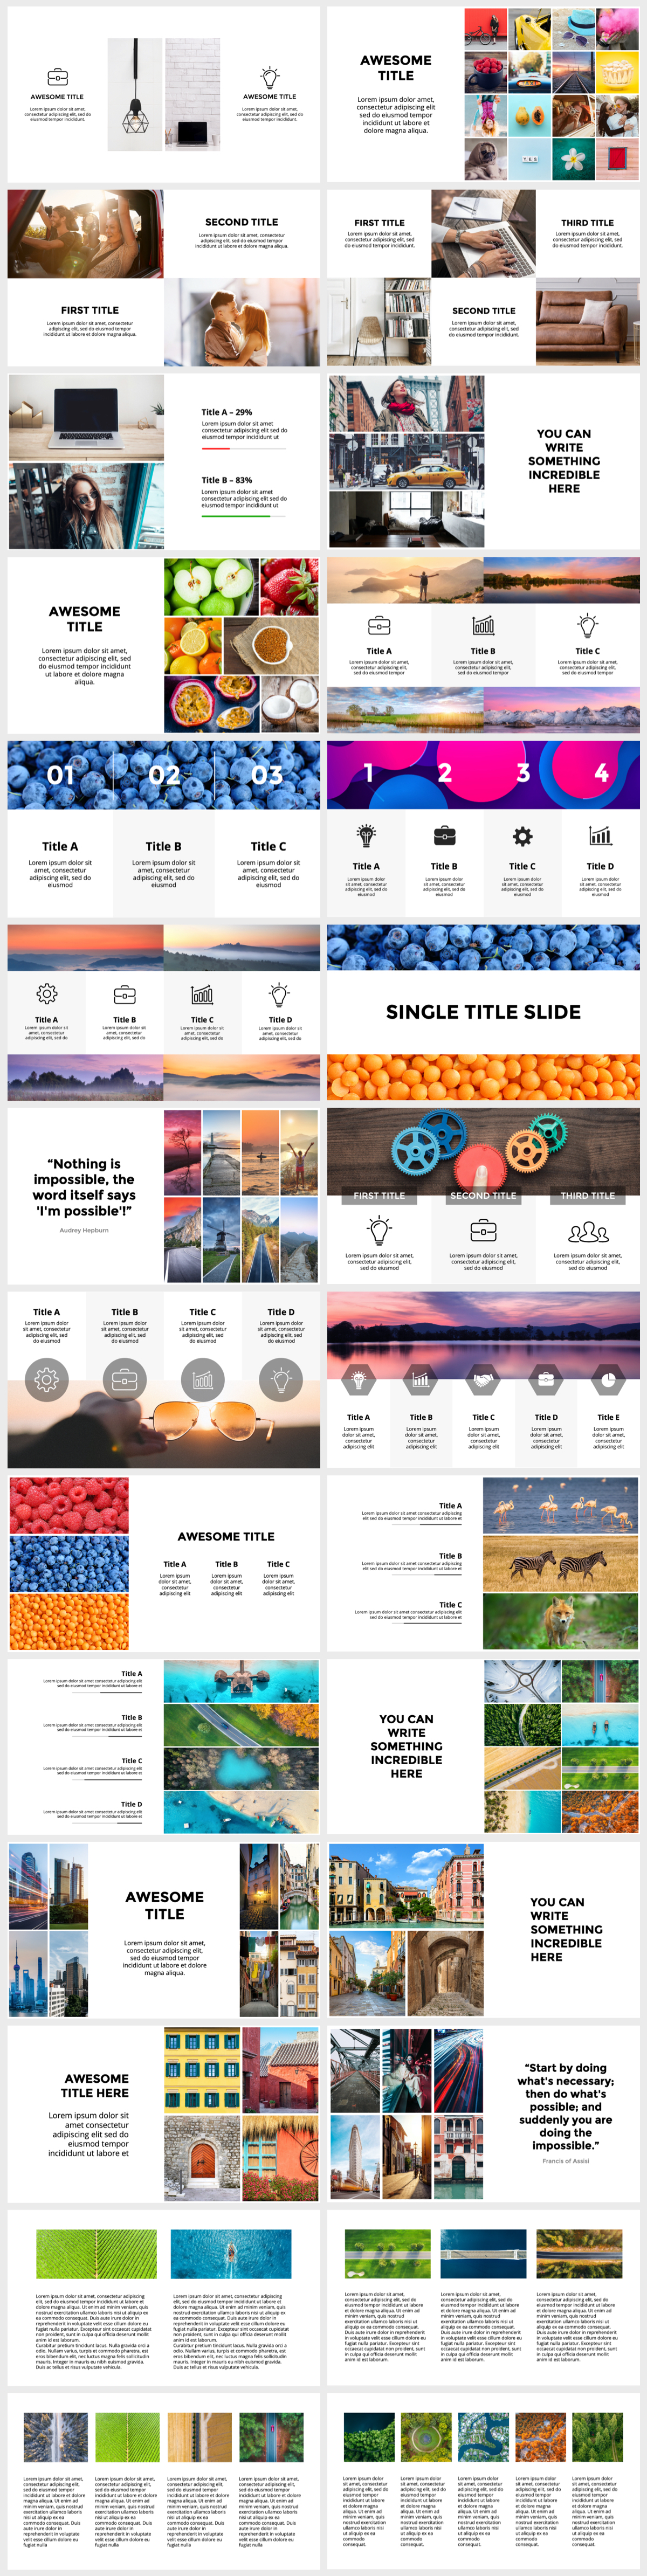 Wowly - 3500 Infographics & Presentation Templates! Updated! PowerPoint Canva Figma Sketch Ai Psd. - 235